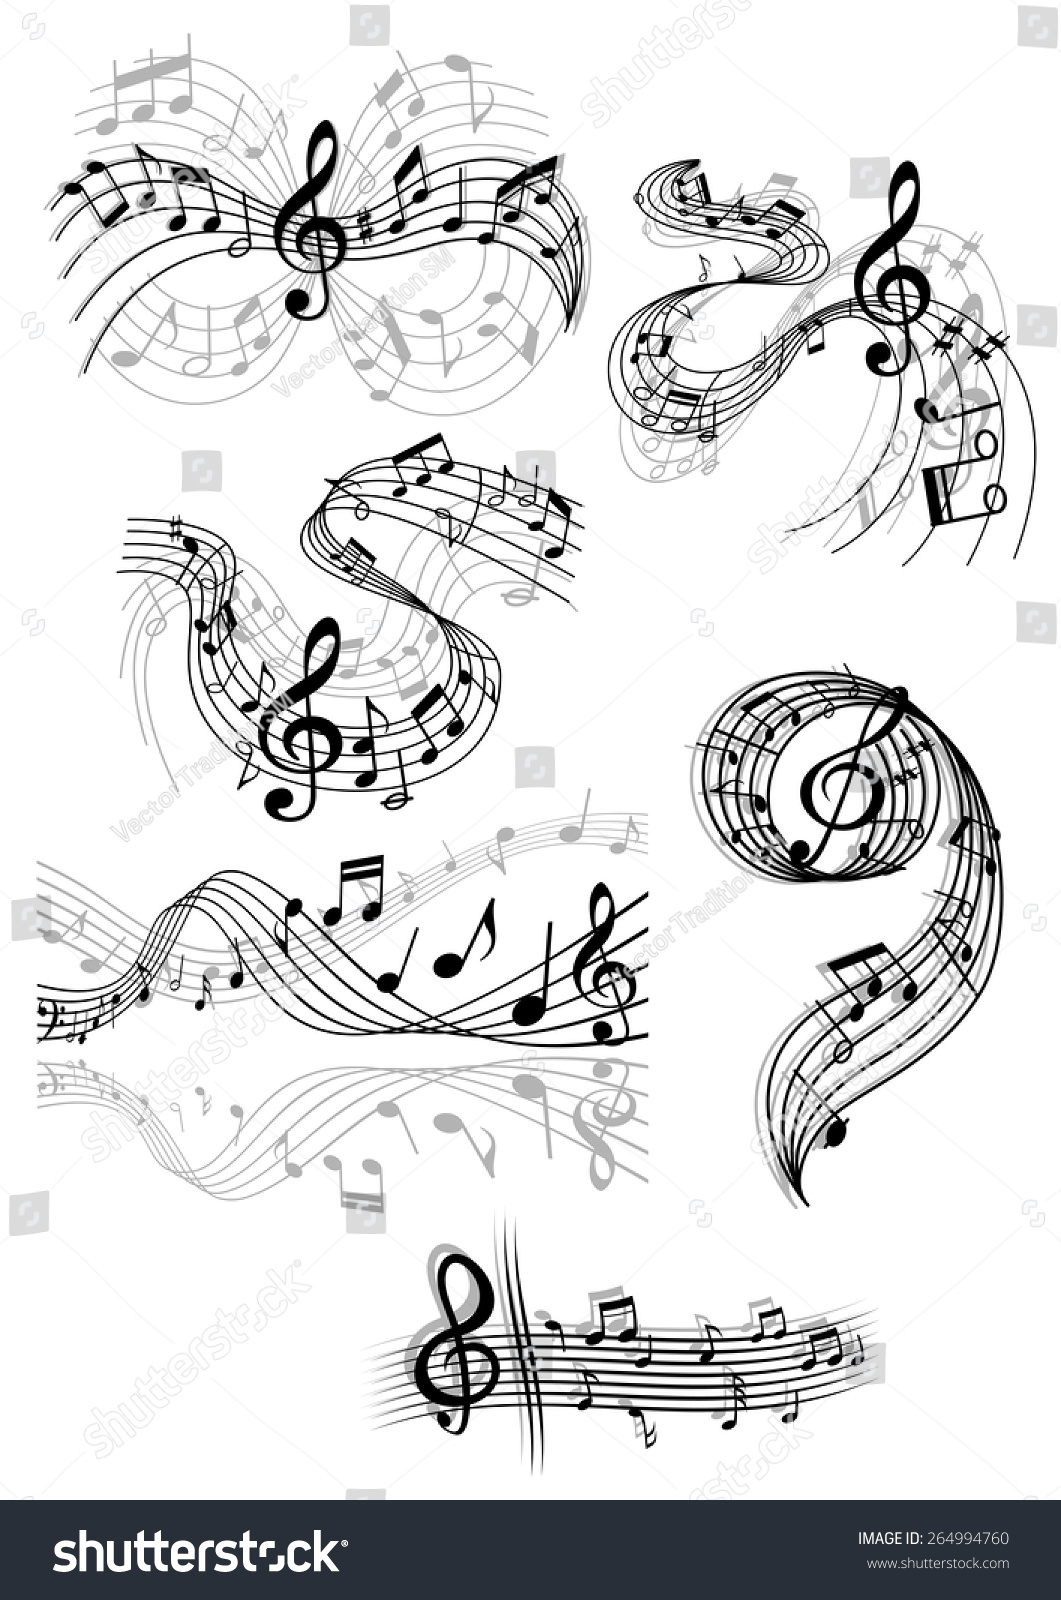 Black And White Drawings Of Swirling Musical Scores And Notes With ...